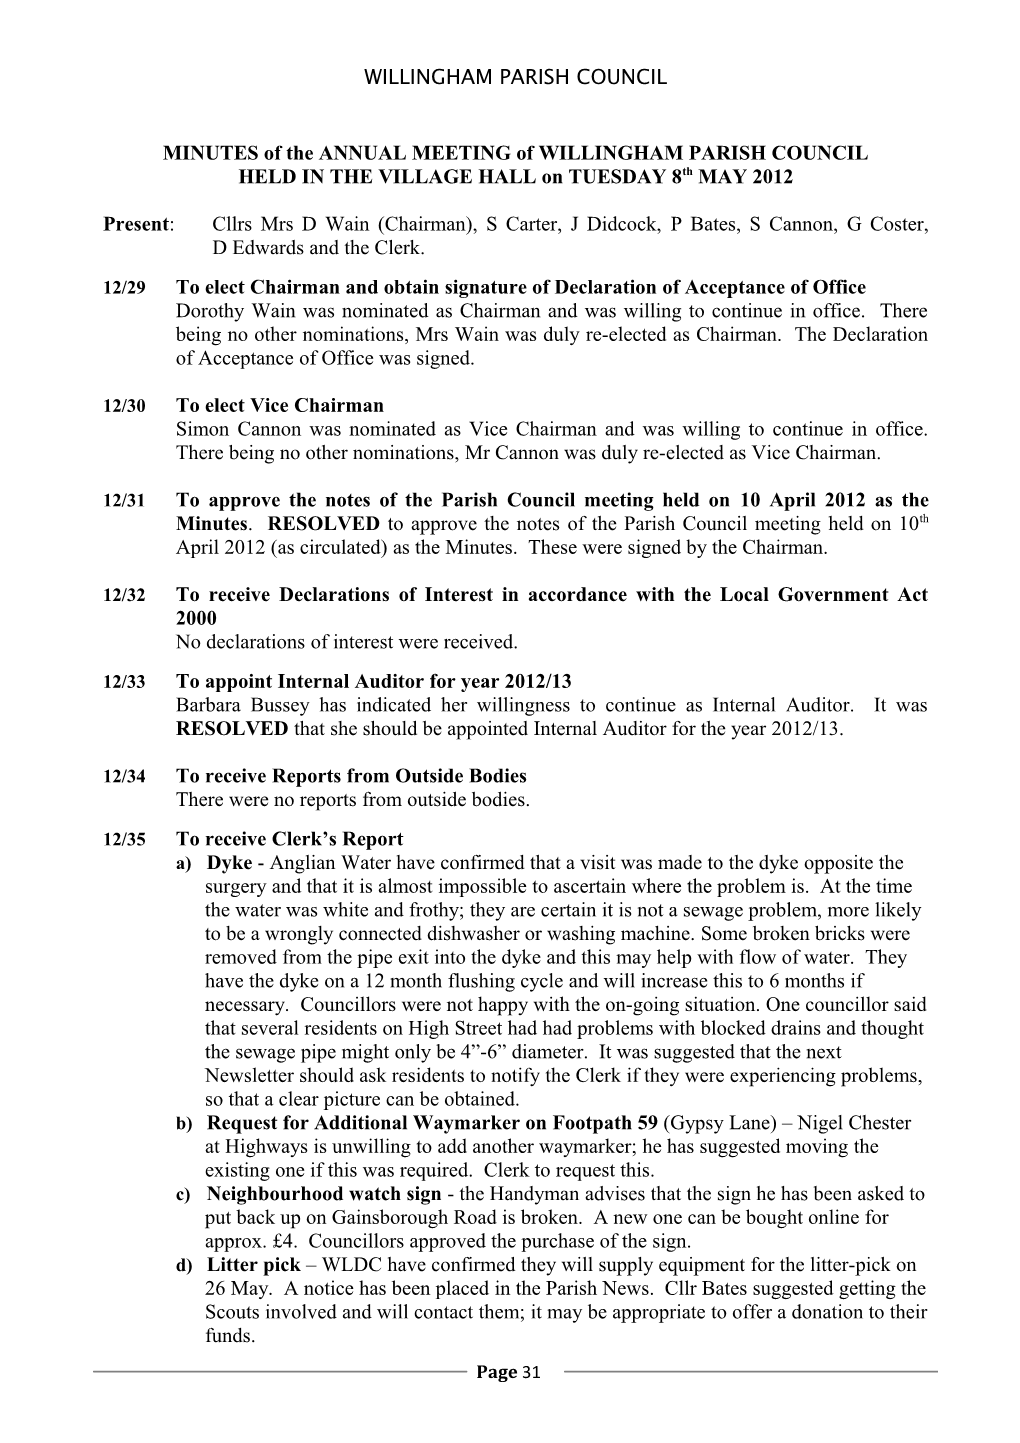 MINUTES of a MEETING of WILLINGHAM PARISH COUNCIL